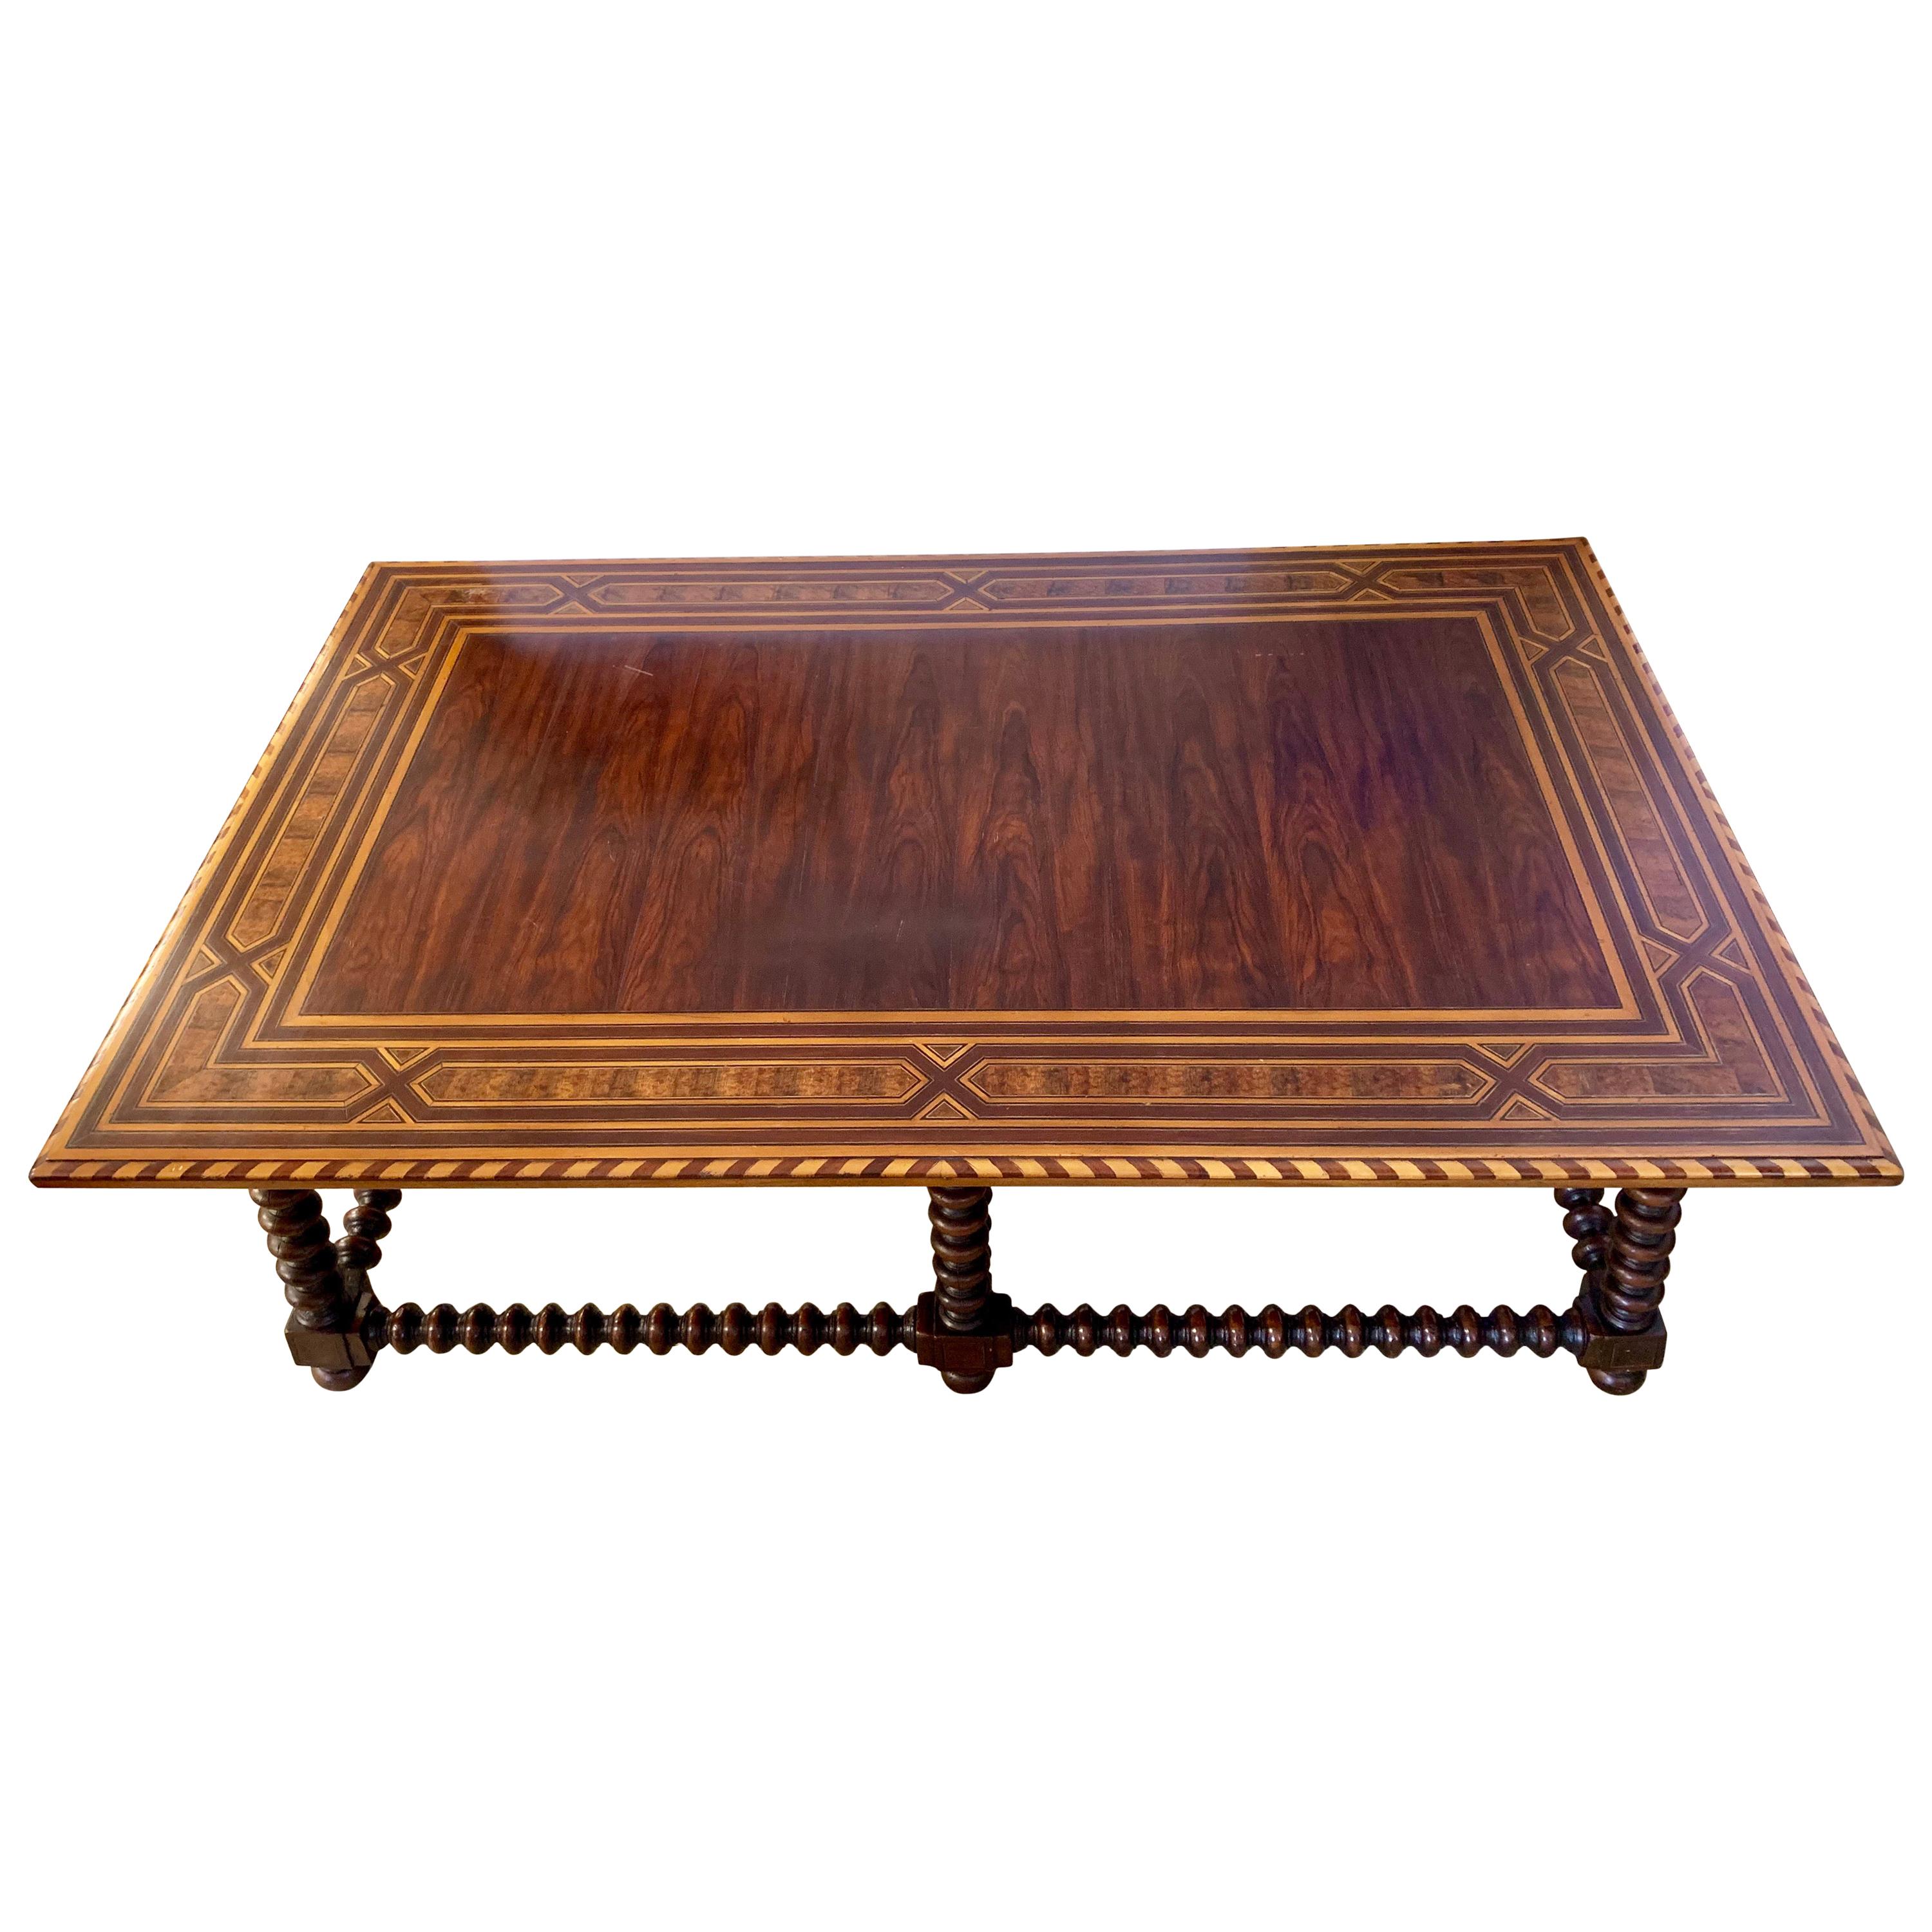 Alfonso Marina Dutch Colonial Inlay Coffee Table with Spool Legs